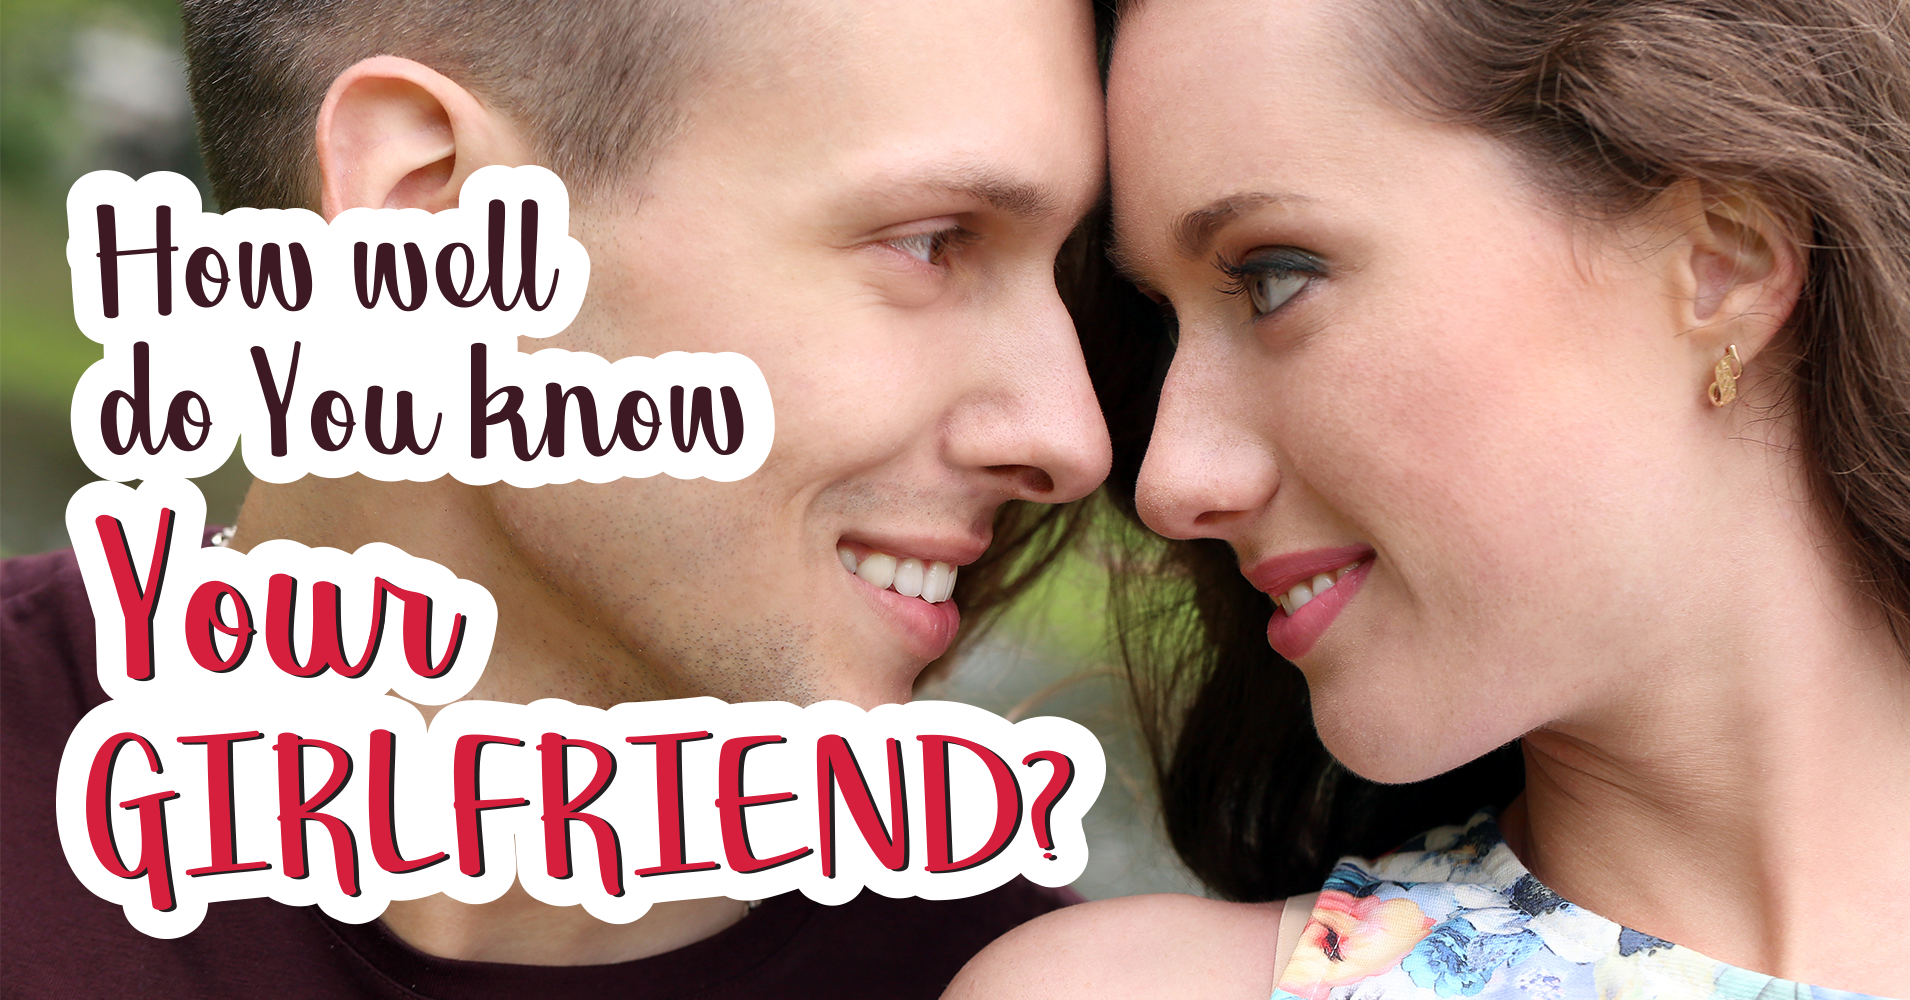 How Well Do You Know Your Girlfriend? - Quiz - Quizony.com